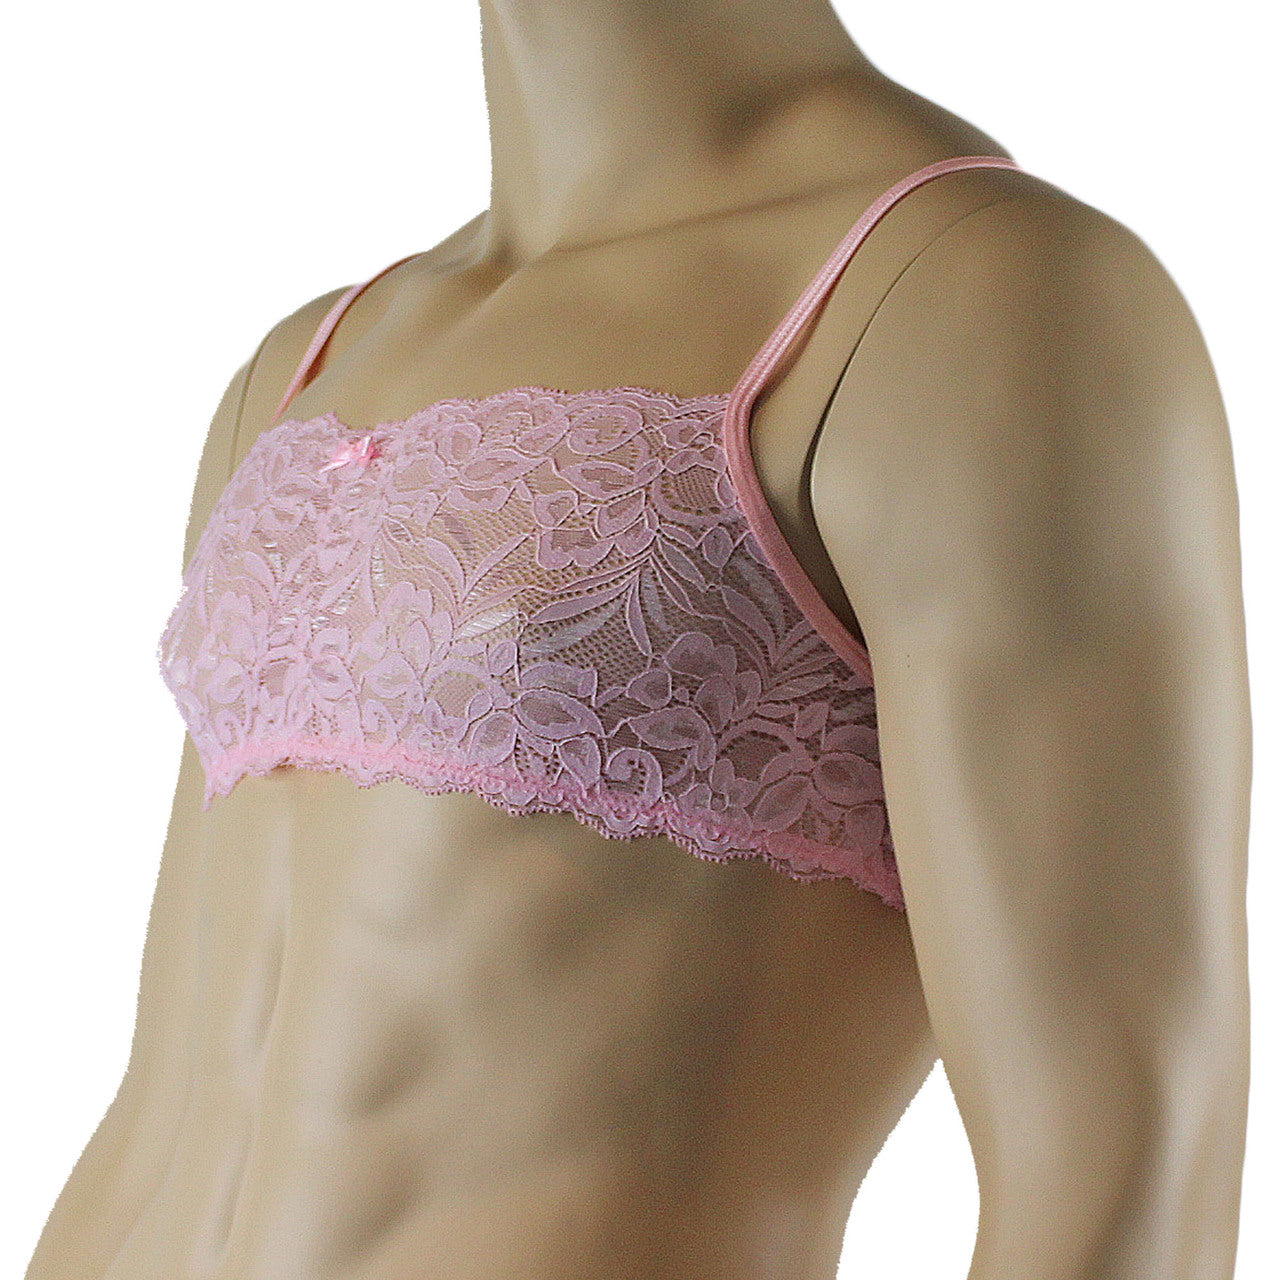 Mens Lingerie Bra Top in Lace with thin Straps (light pink plus other colours)